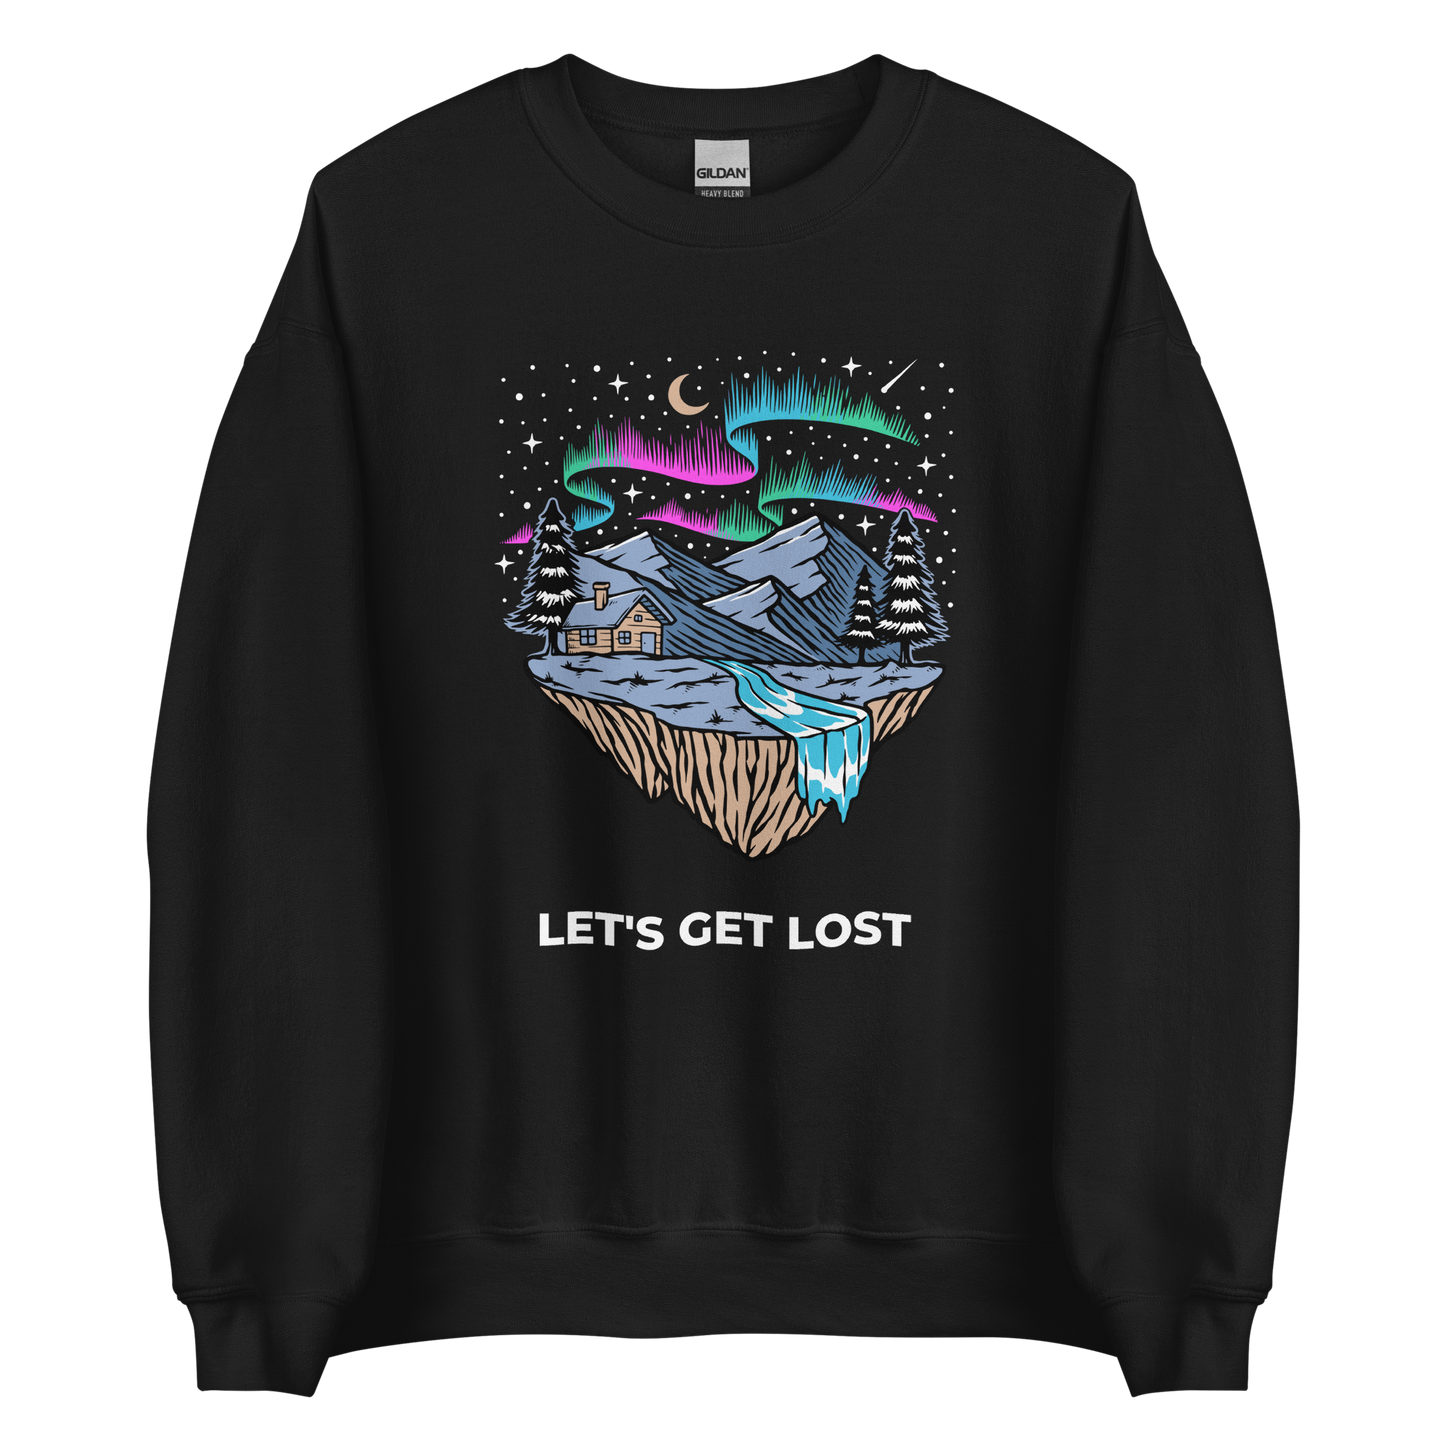 Black Let's Get Lost Sweatshirt featuring a mesmerizing night sky, adorned with stars and aurora borealis graphic on the chest - Cool Graphic Northern Lights Sweatshirts - Boozy Fox